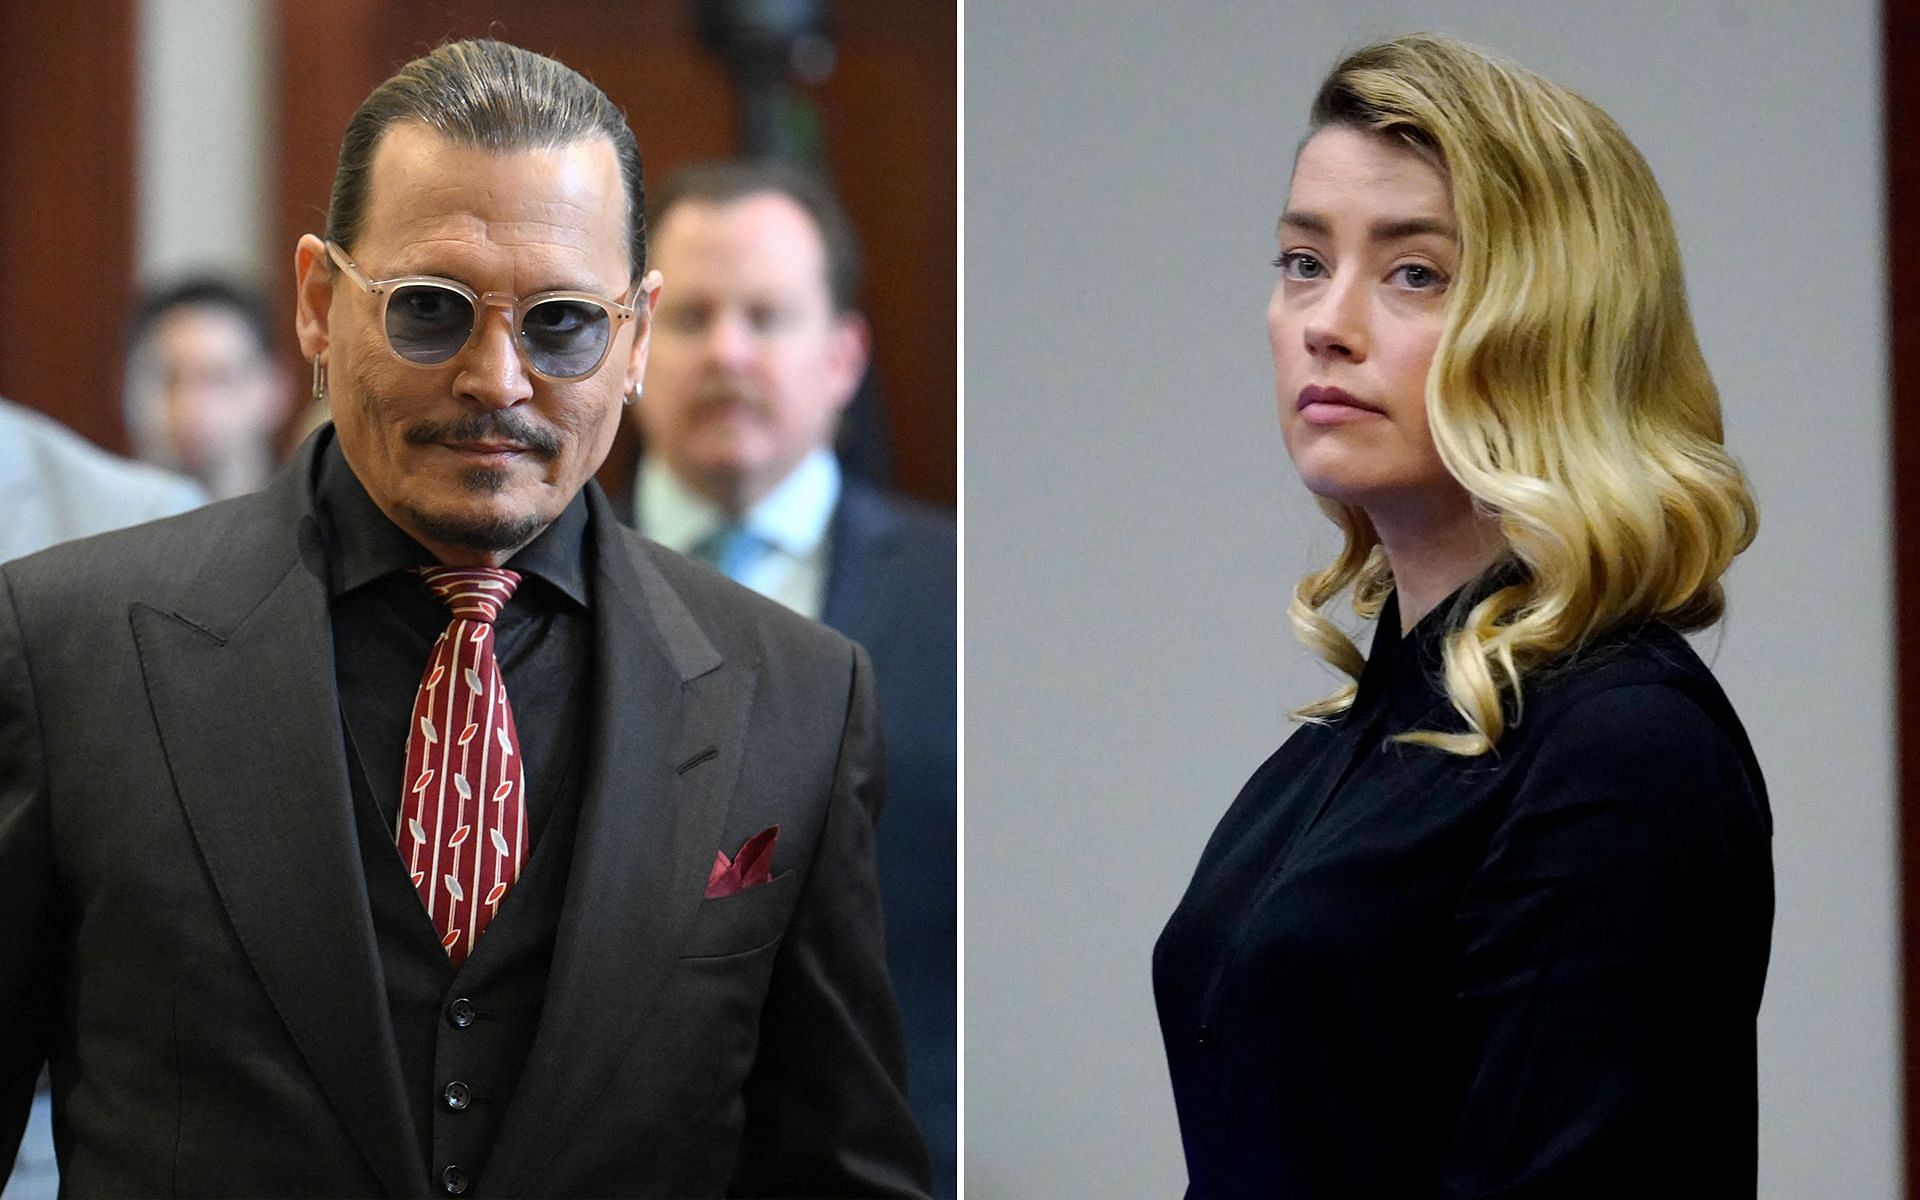 Amber Heard x Johnny Depp trial: When is the expected verdict date by jury?